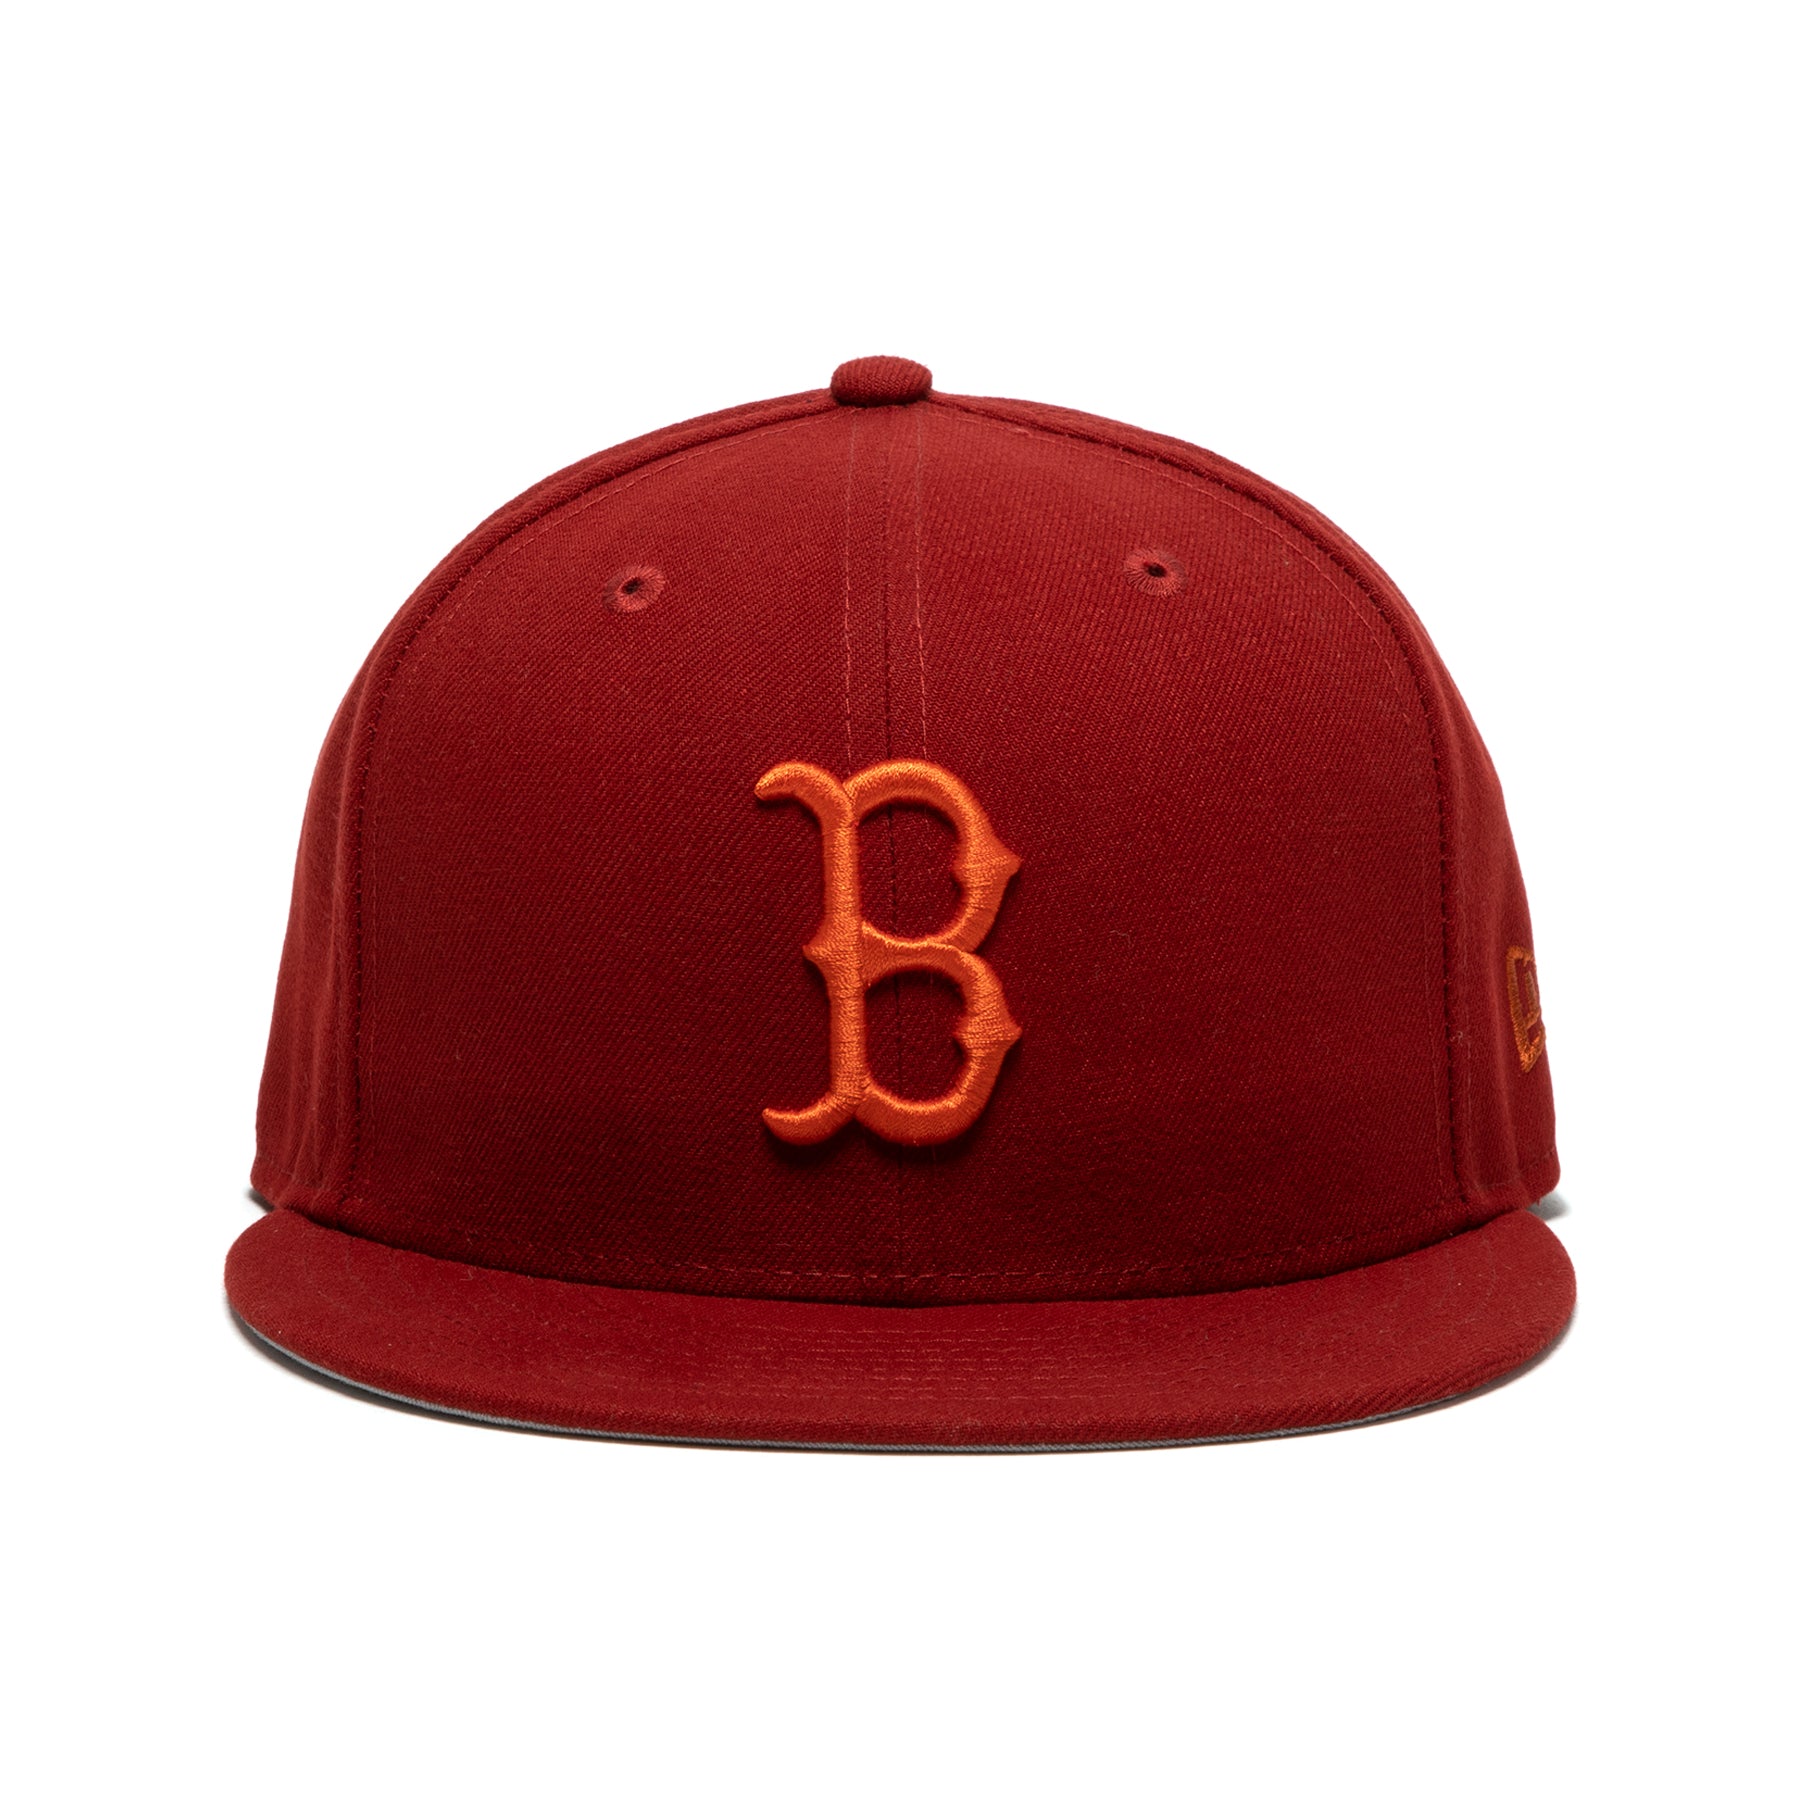 Boston Red Sox New Era Concepts Champions 59FITY Fitted Hat - Tan